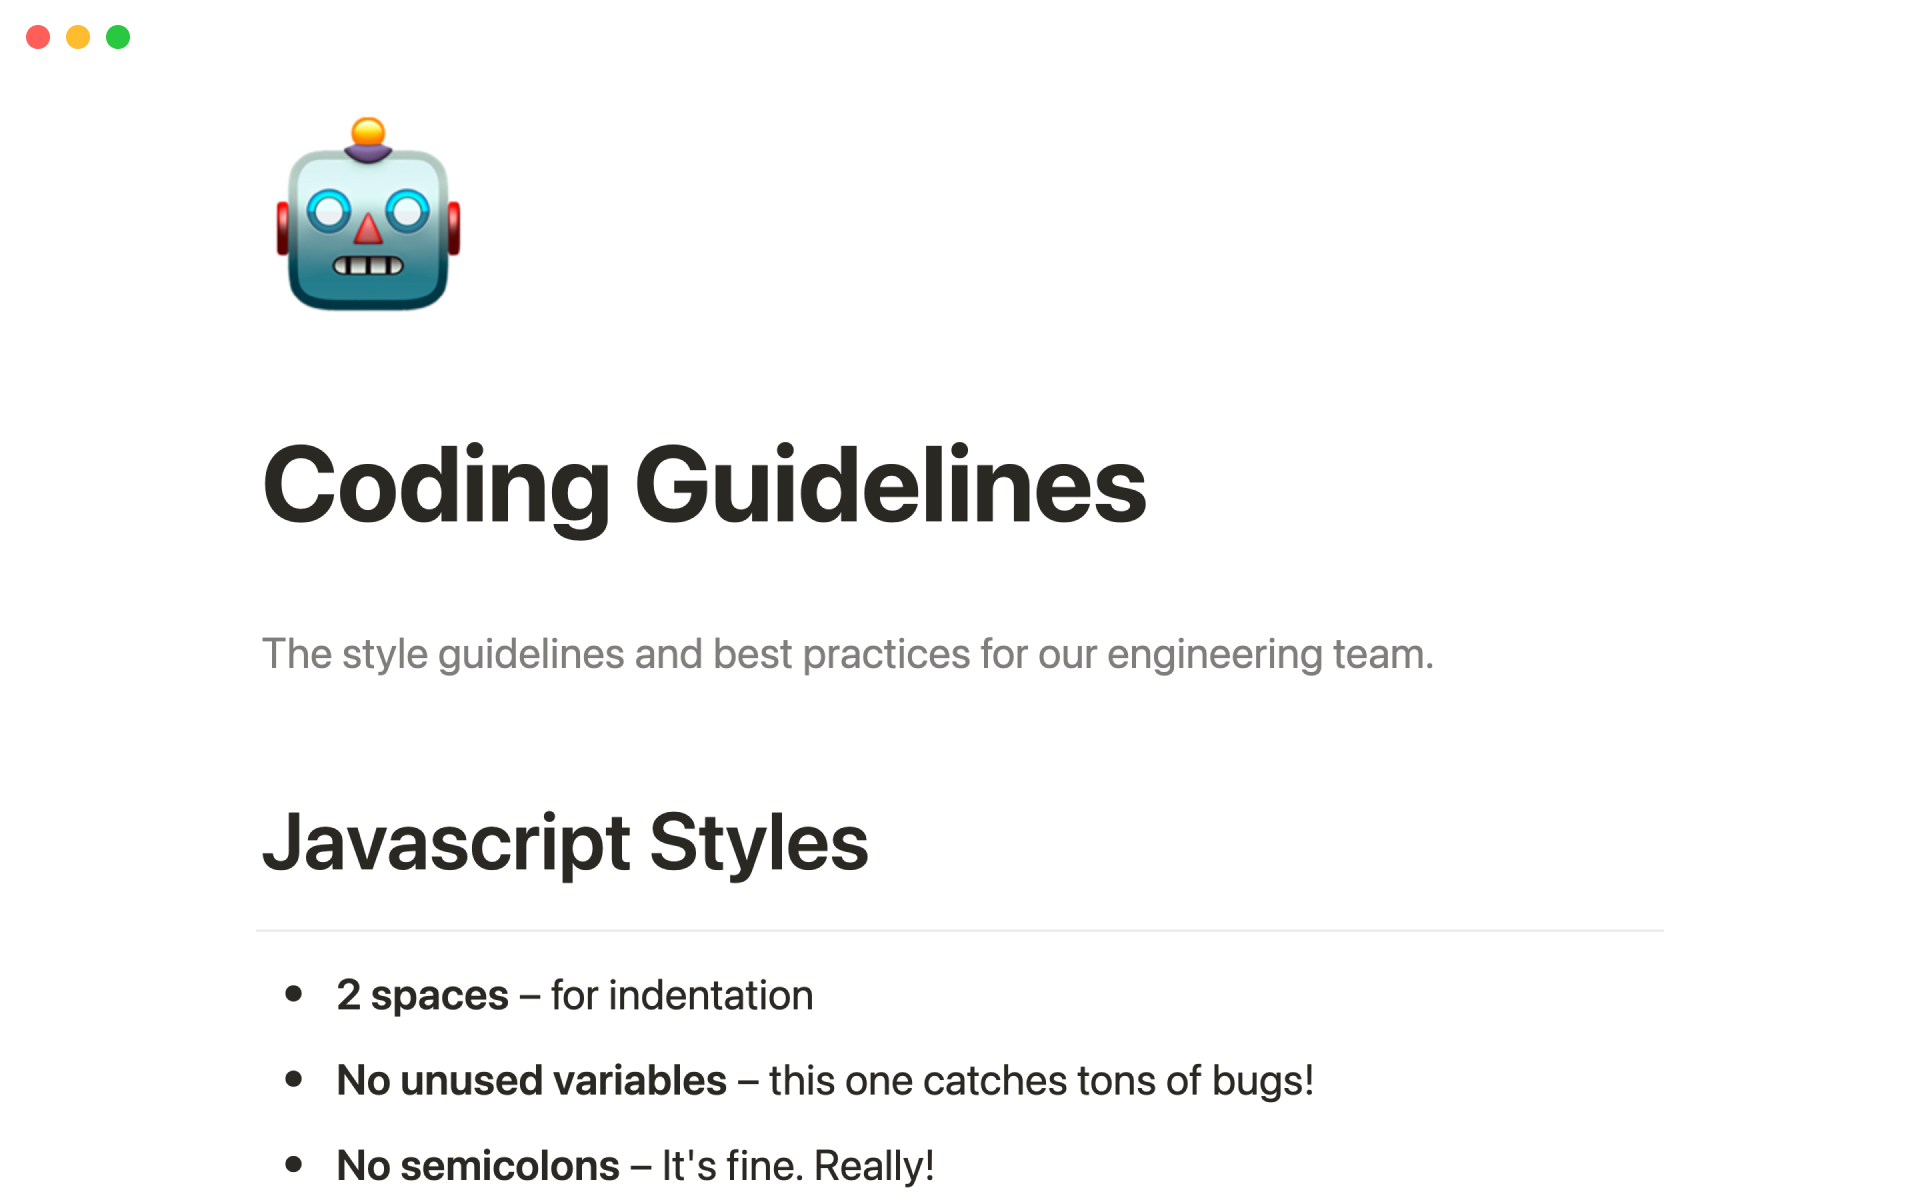 Get your engineering team (and any new teammates you're onboarding) up to speed fast with an accessible, digestible set of rules for your codebase. 